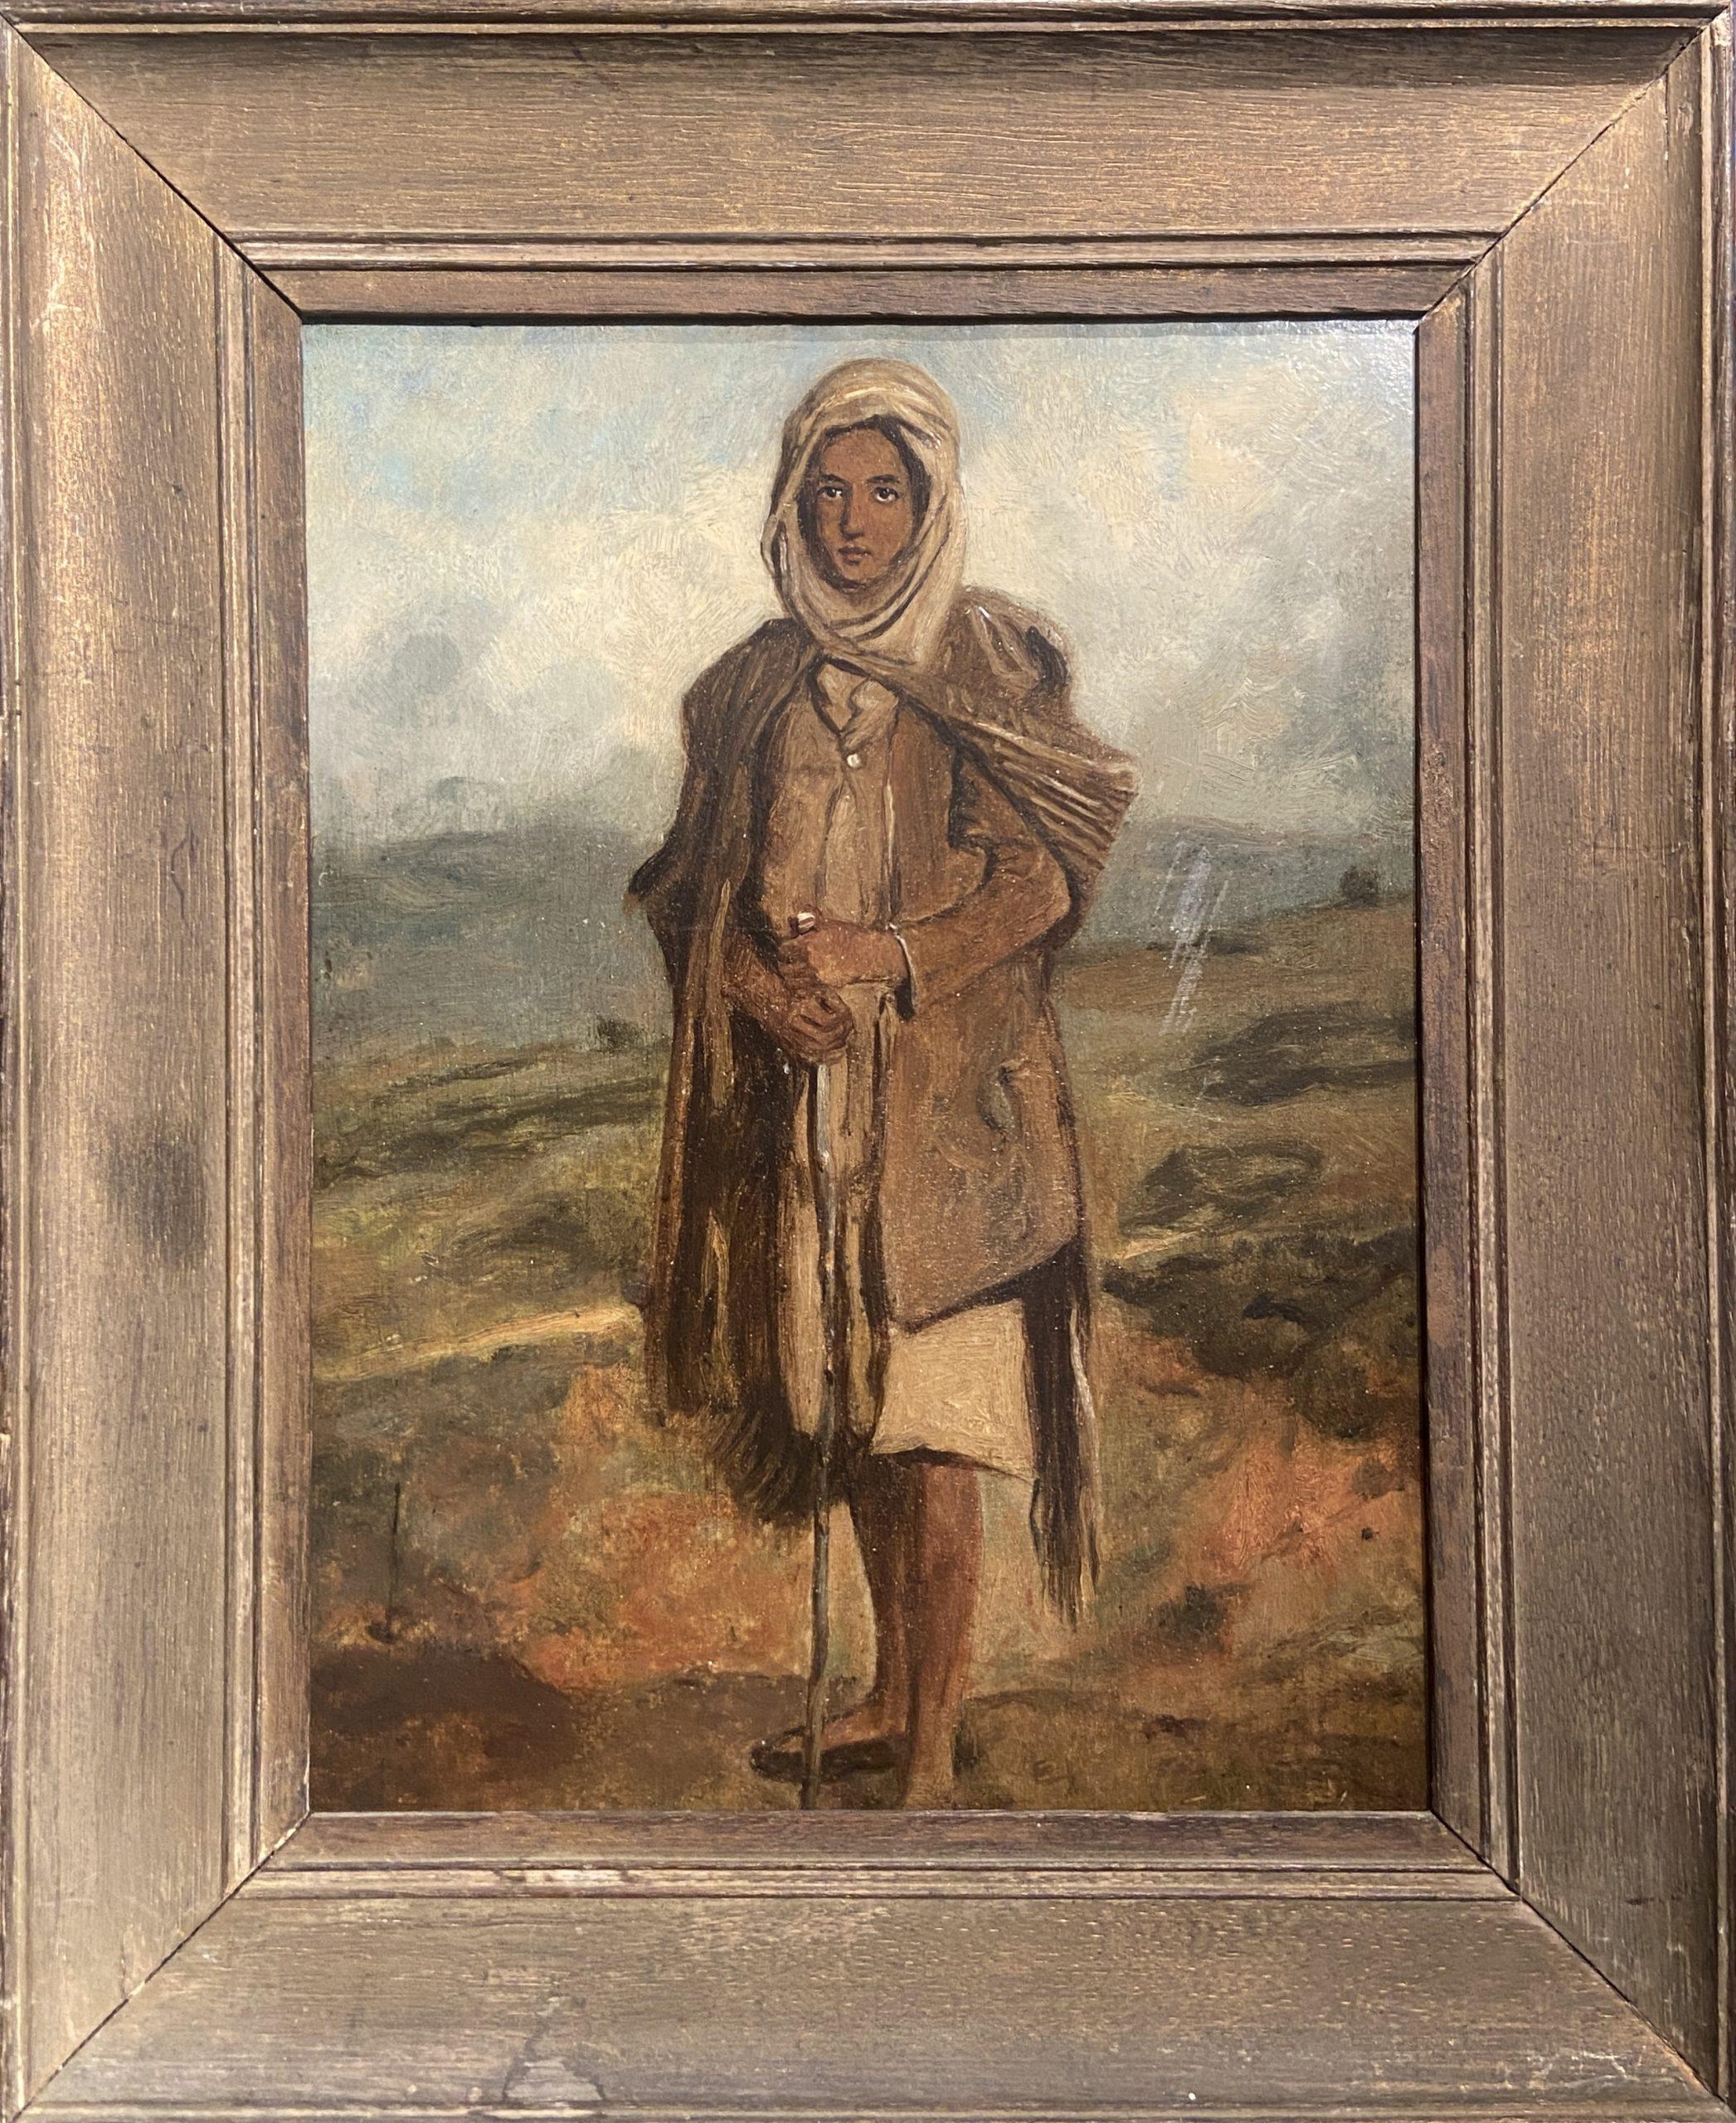 Oil on panel
Image size: 12 1/2 x 9 1/4 inches (31.75 x 23.5 cm)
Original frame

This is a captivating portrait of a young woman who we appears to be a traveller. The painting has a sensitive and cohesive colour pallet where the subject and the